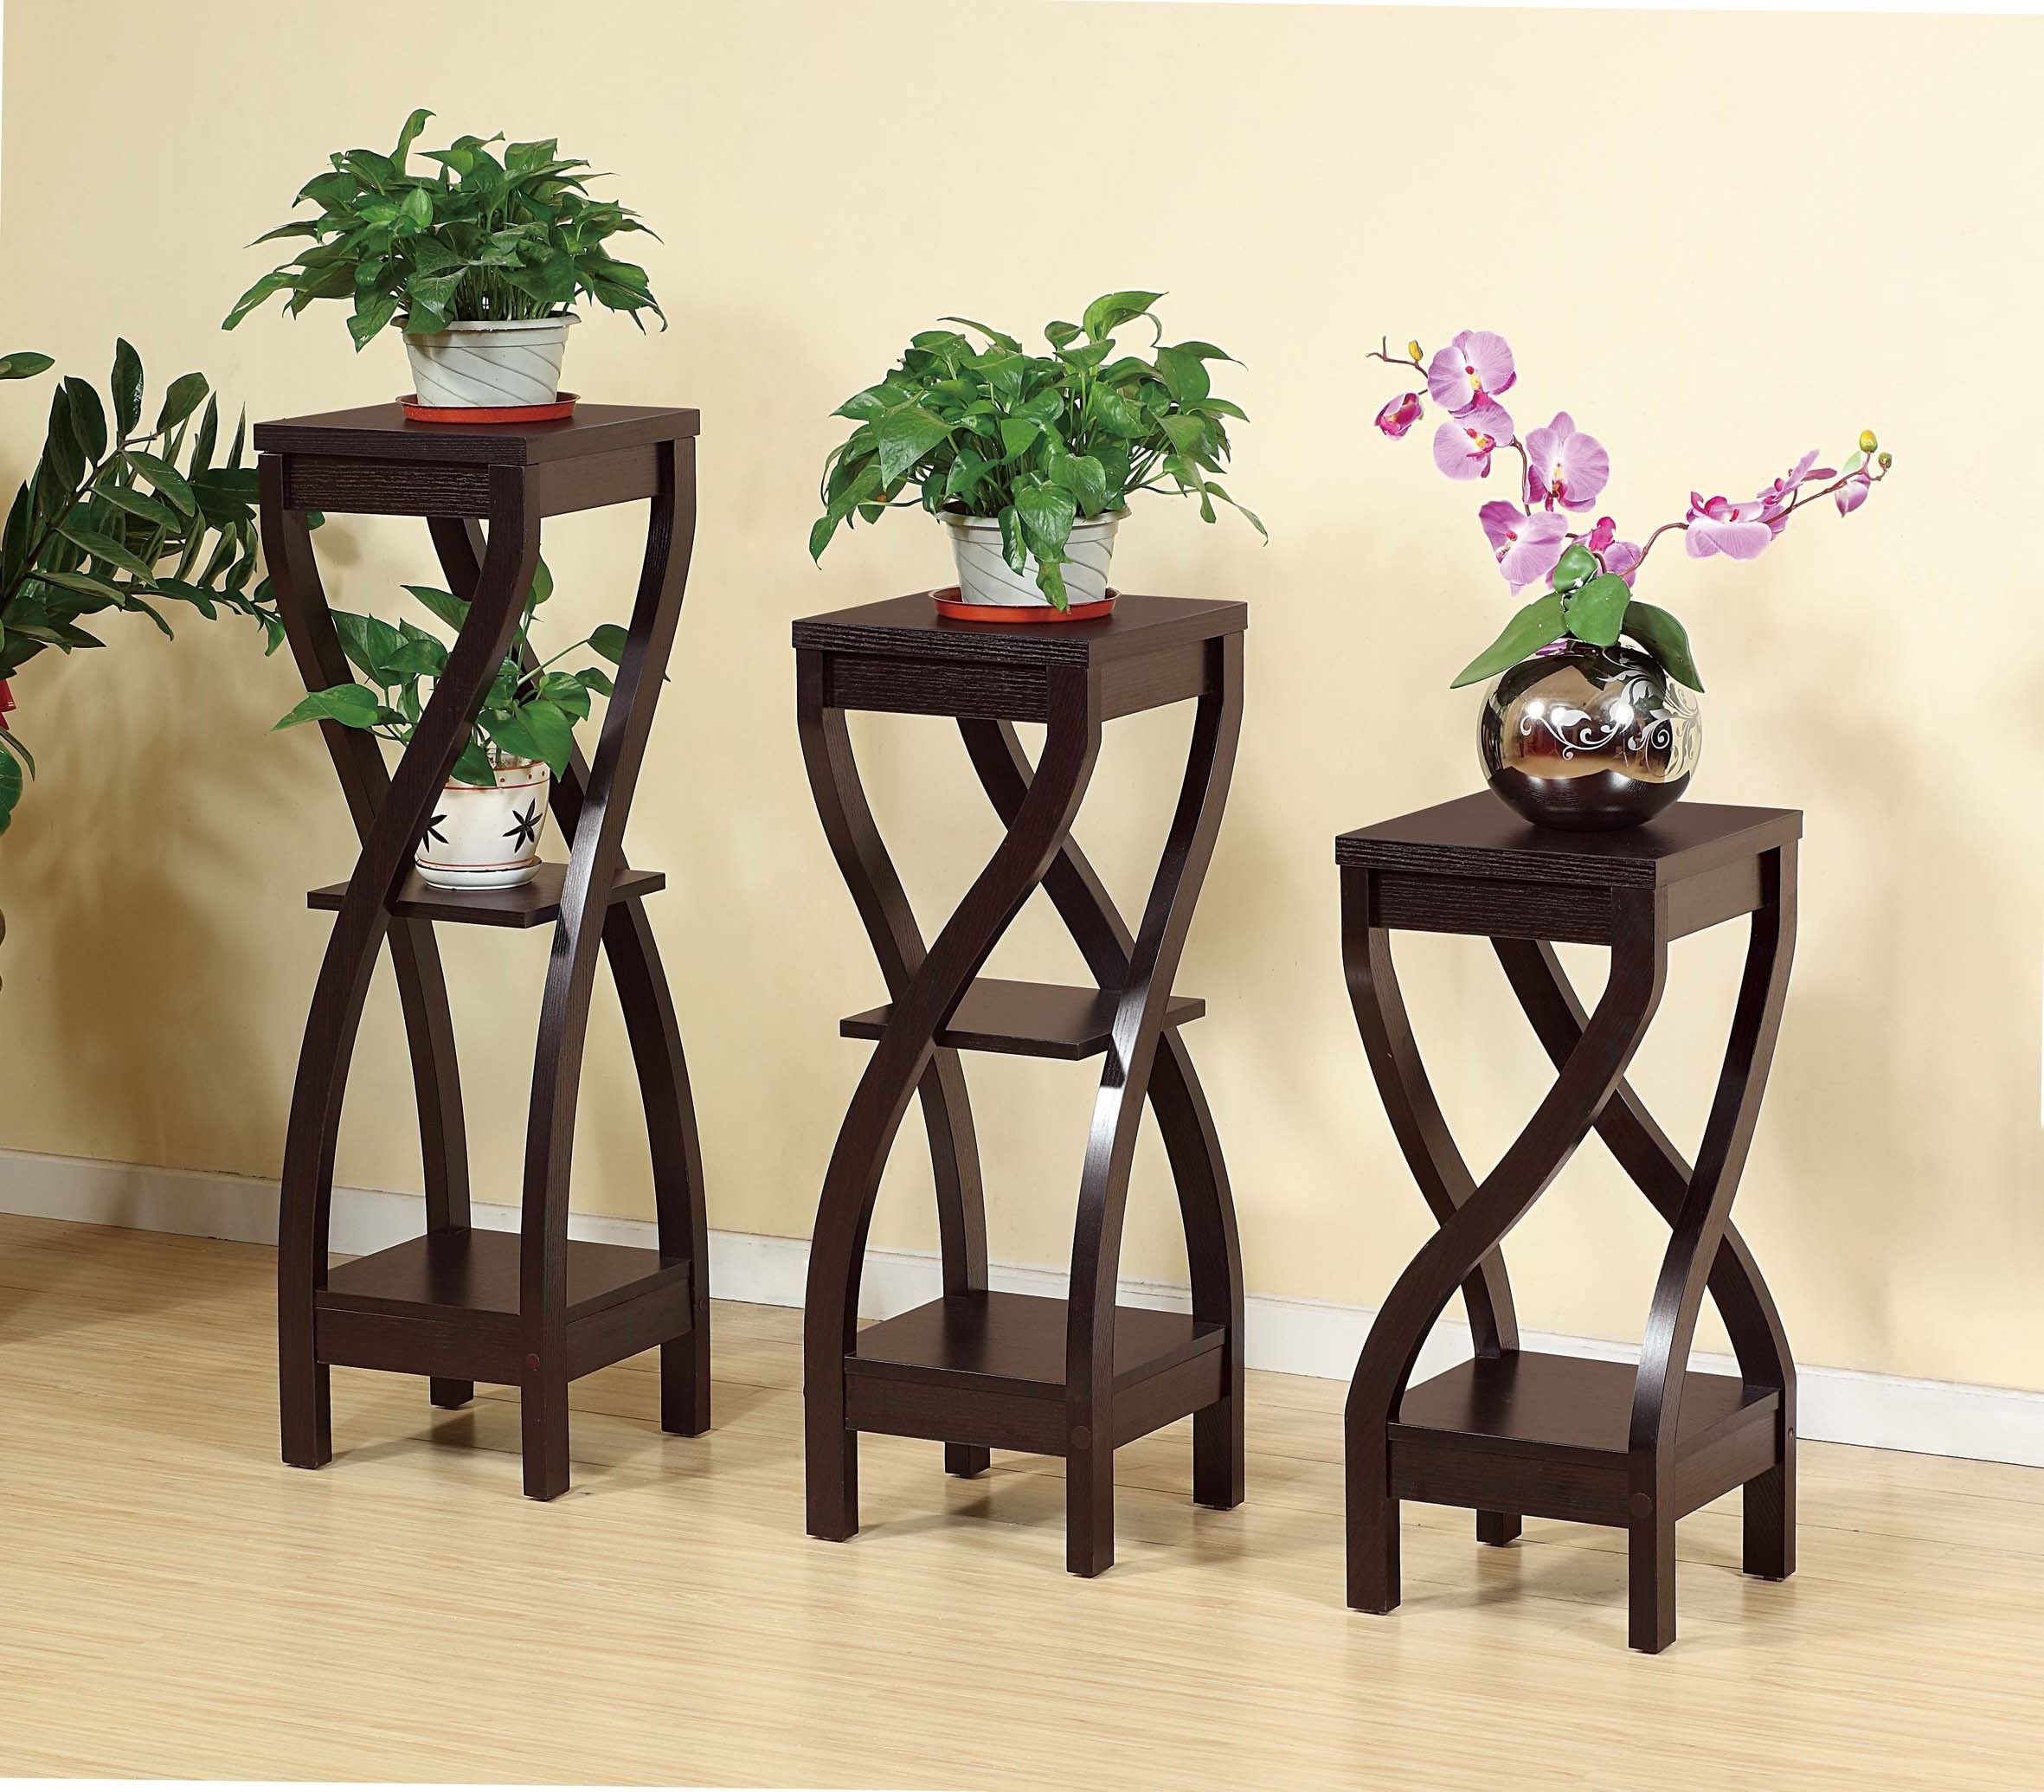 Most Up To Date Pedestal Plant Stands Within Ebern Designs Delhi Square Pedestal Plant Stand & Reviews (View 4 of 15)